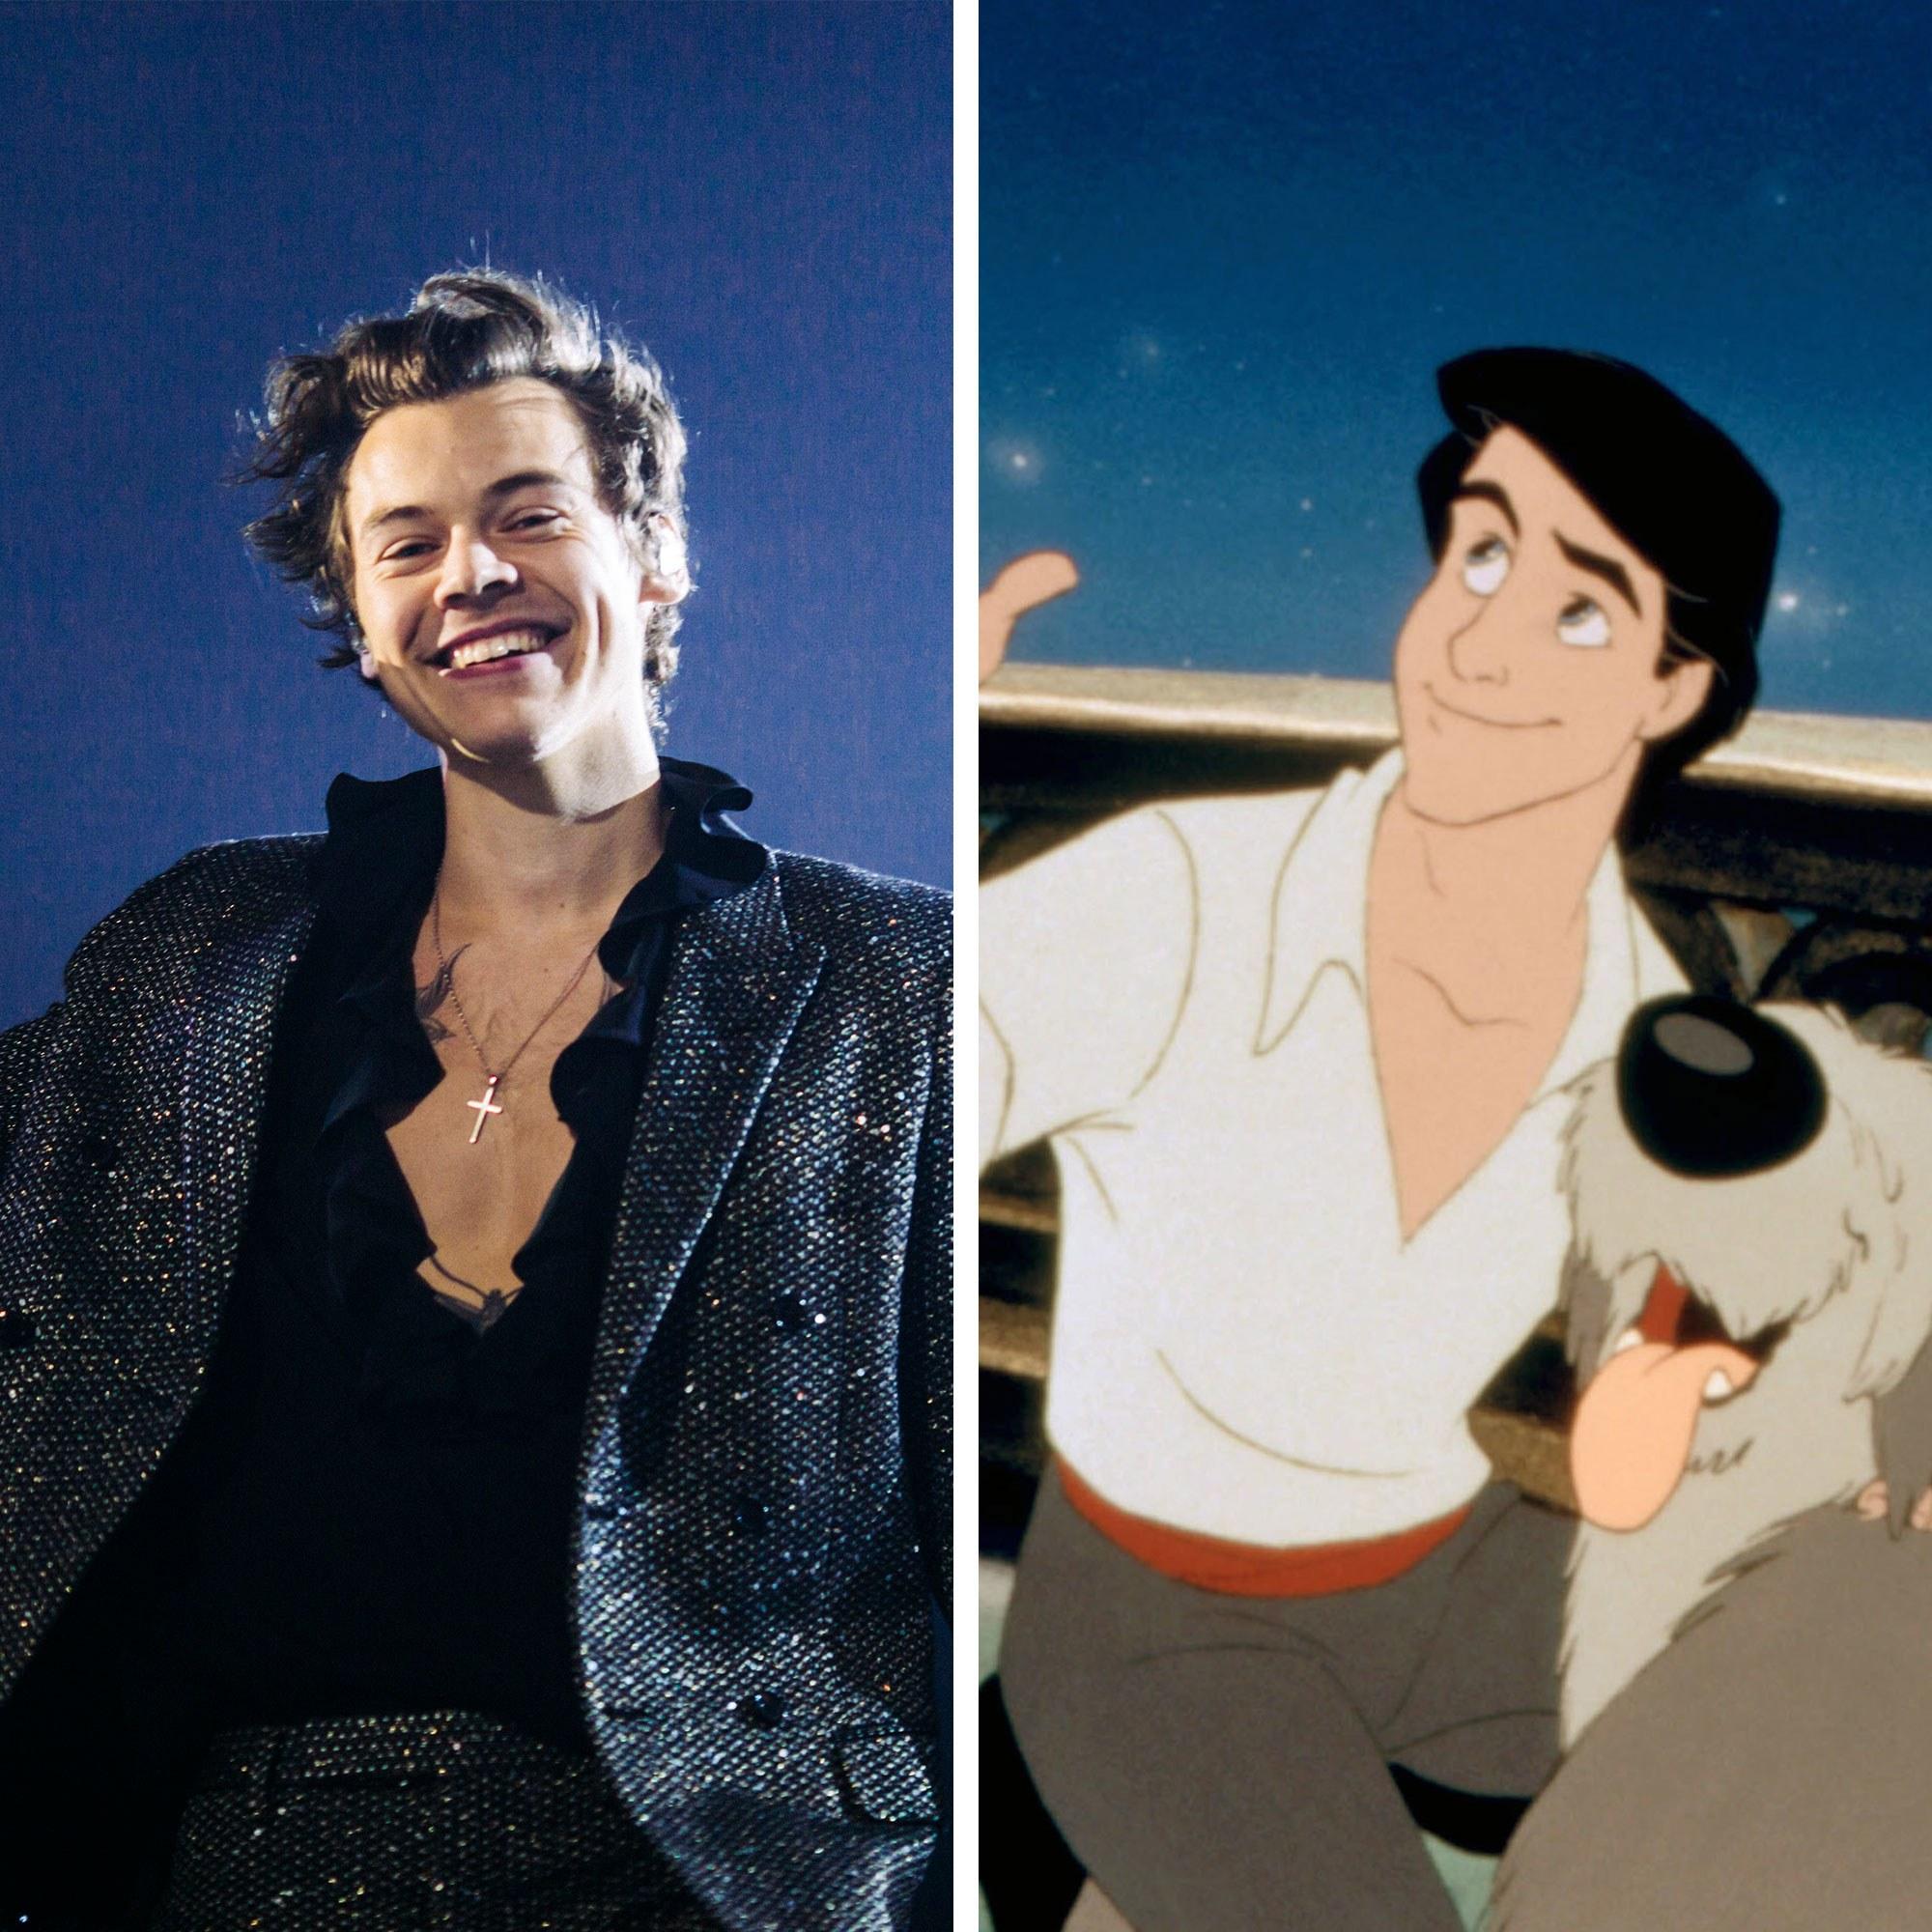 Harry Styles Is Reportedly Being Considered for the Role of Prince